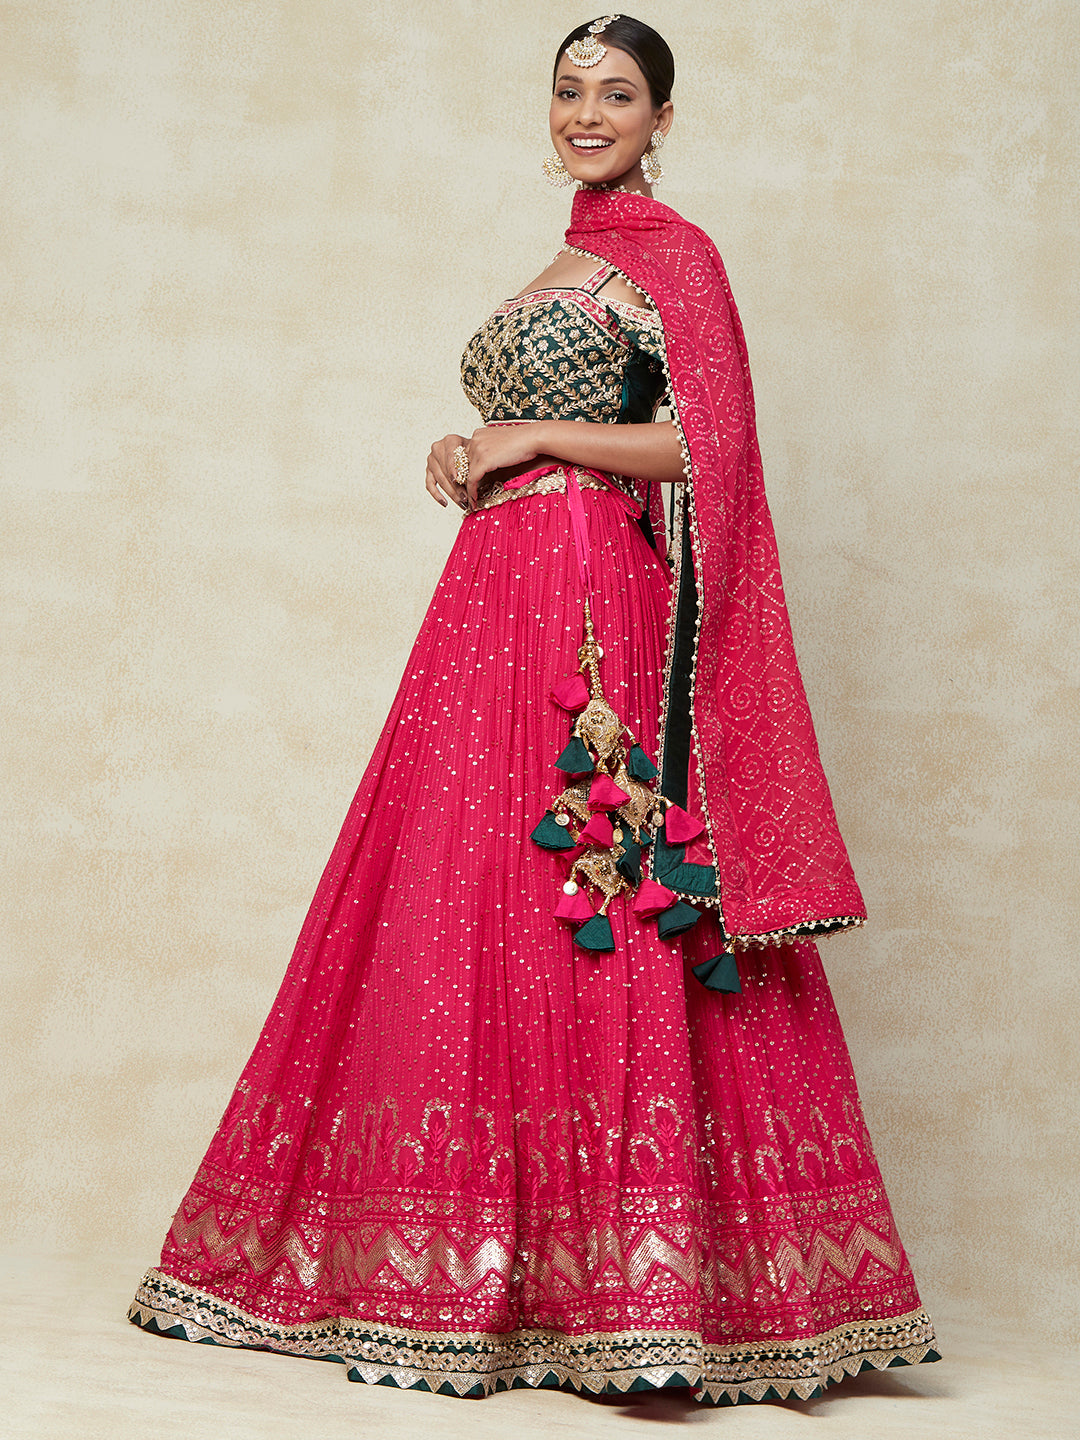 Pink Georgette Lehenga and Bottle Green Color Blouse with Flower Embroidery - PepaBai